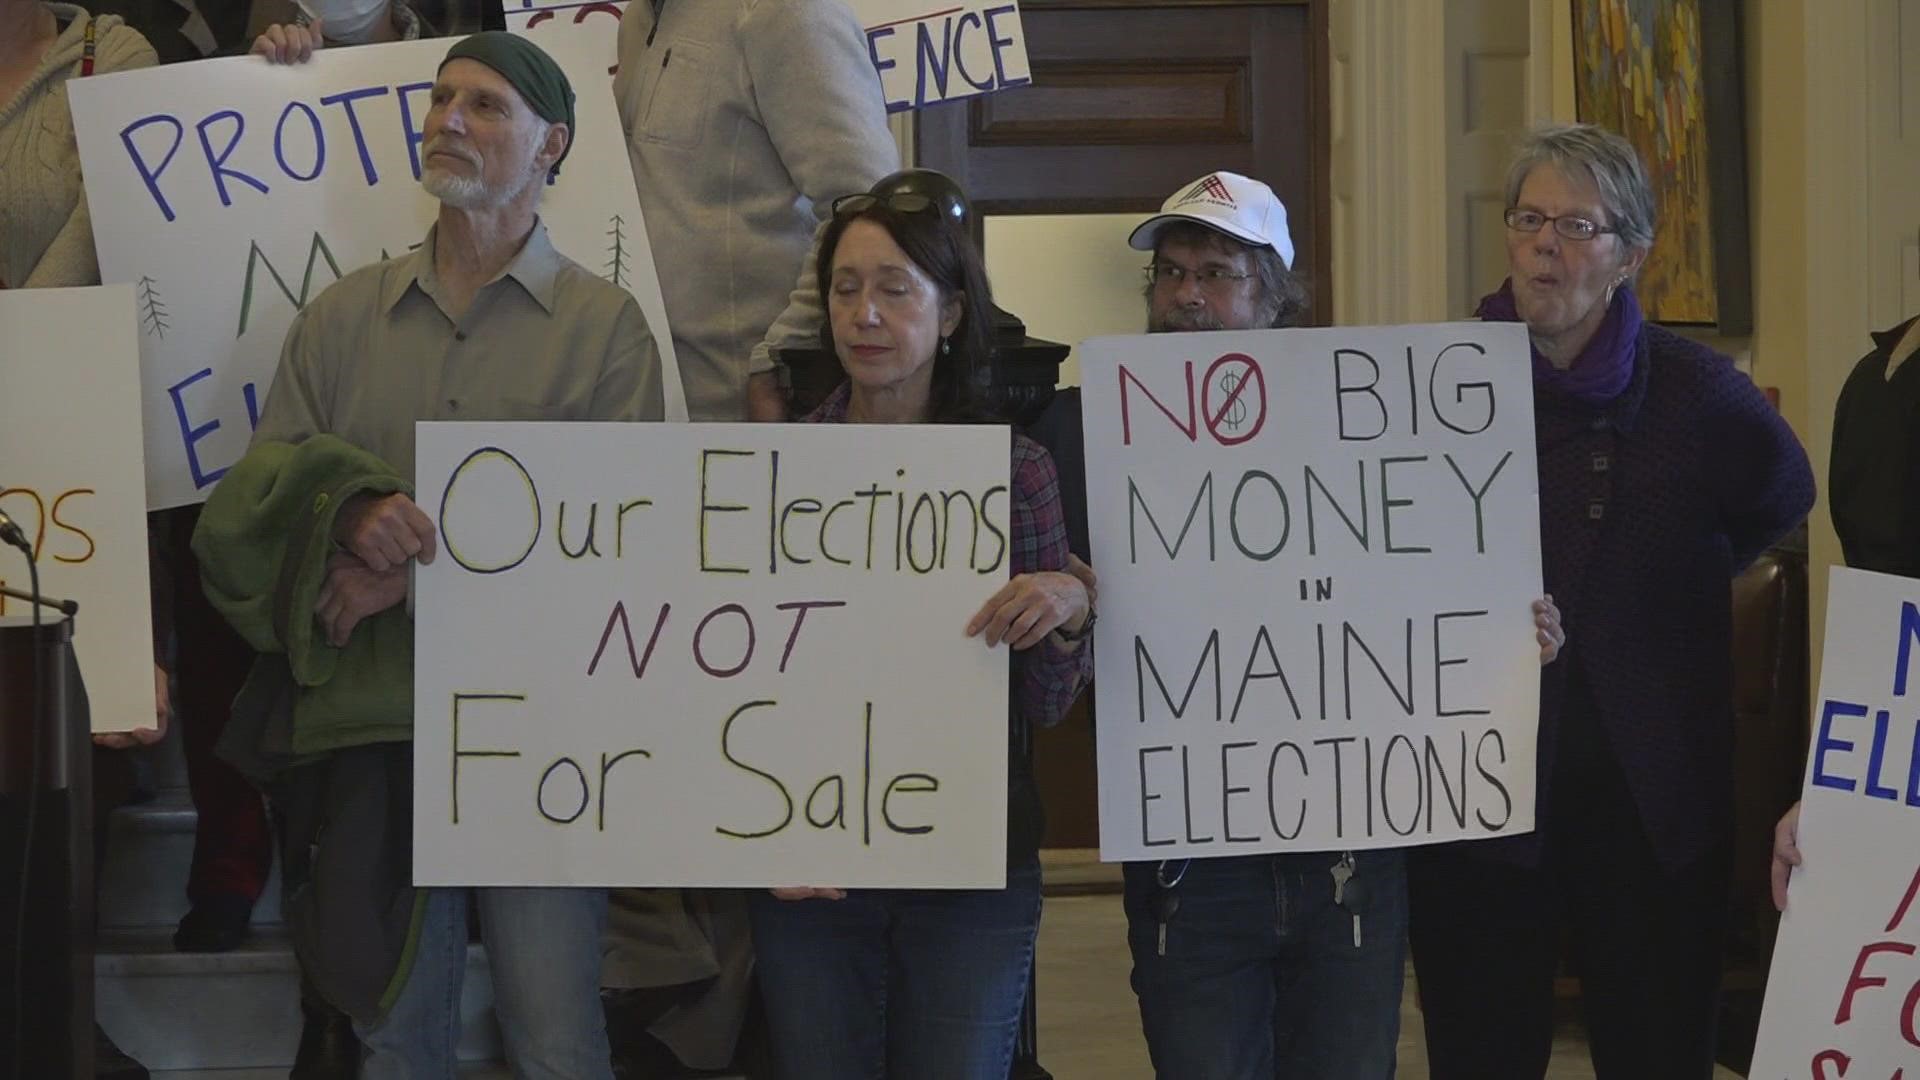 More than 80,000 Maine voter signatures were submitted Tuesday morning to the Secretary of State.